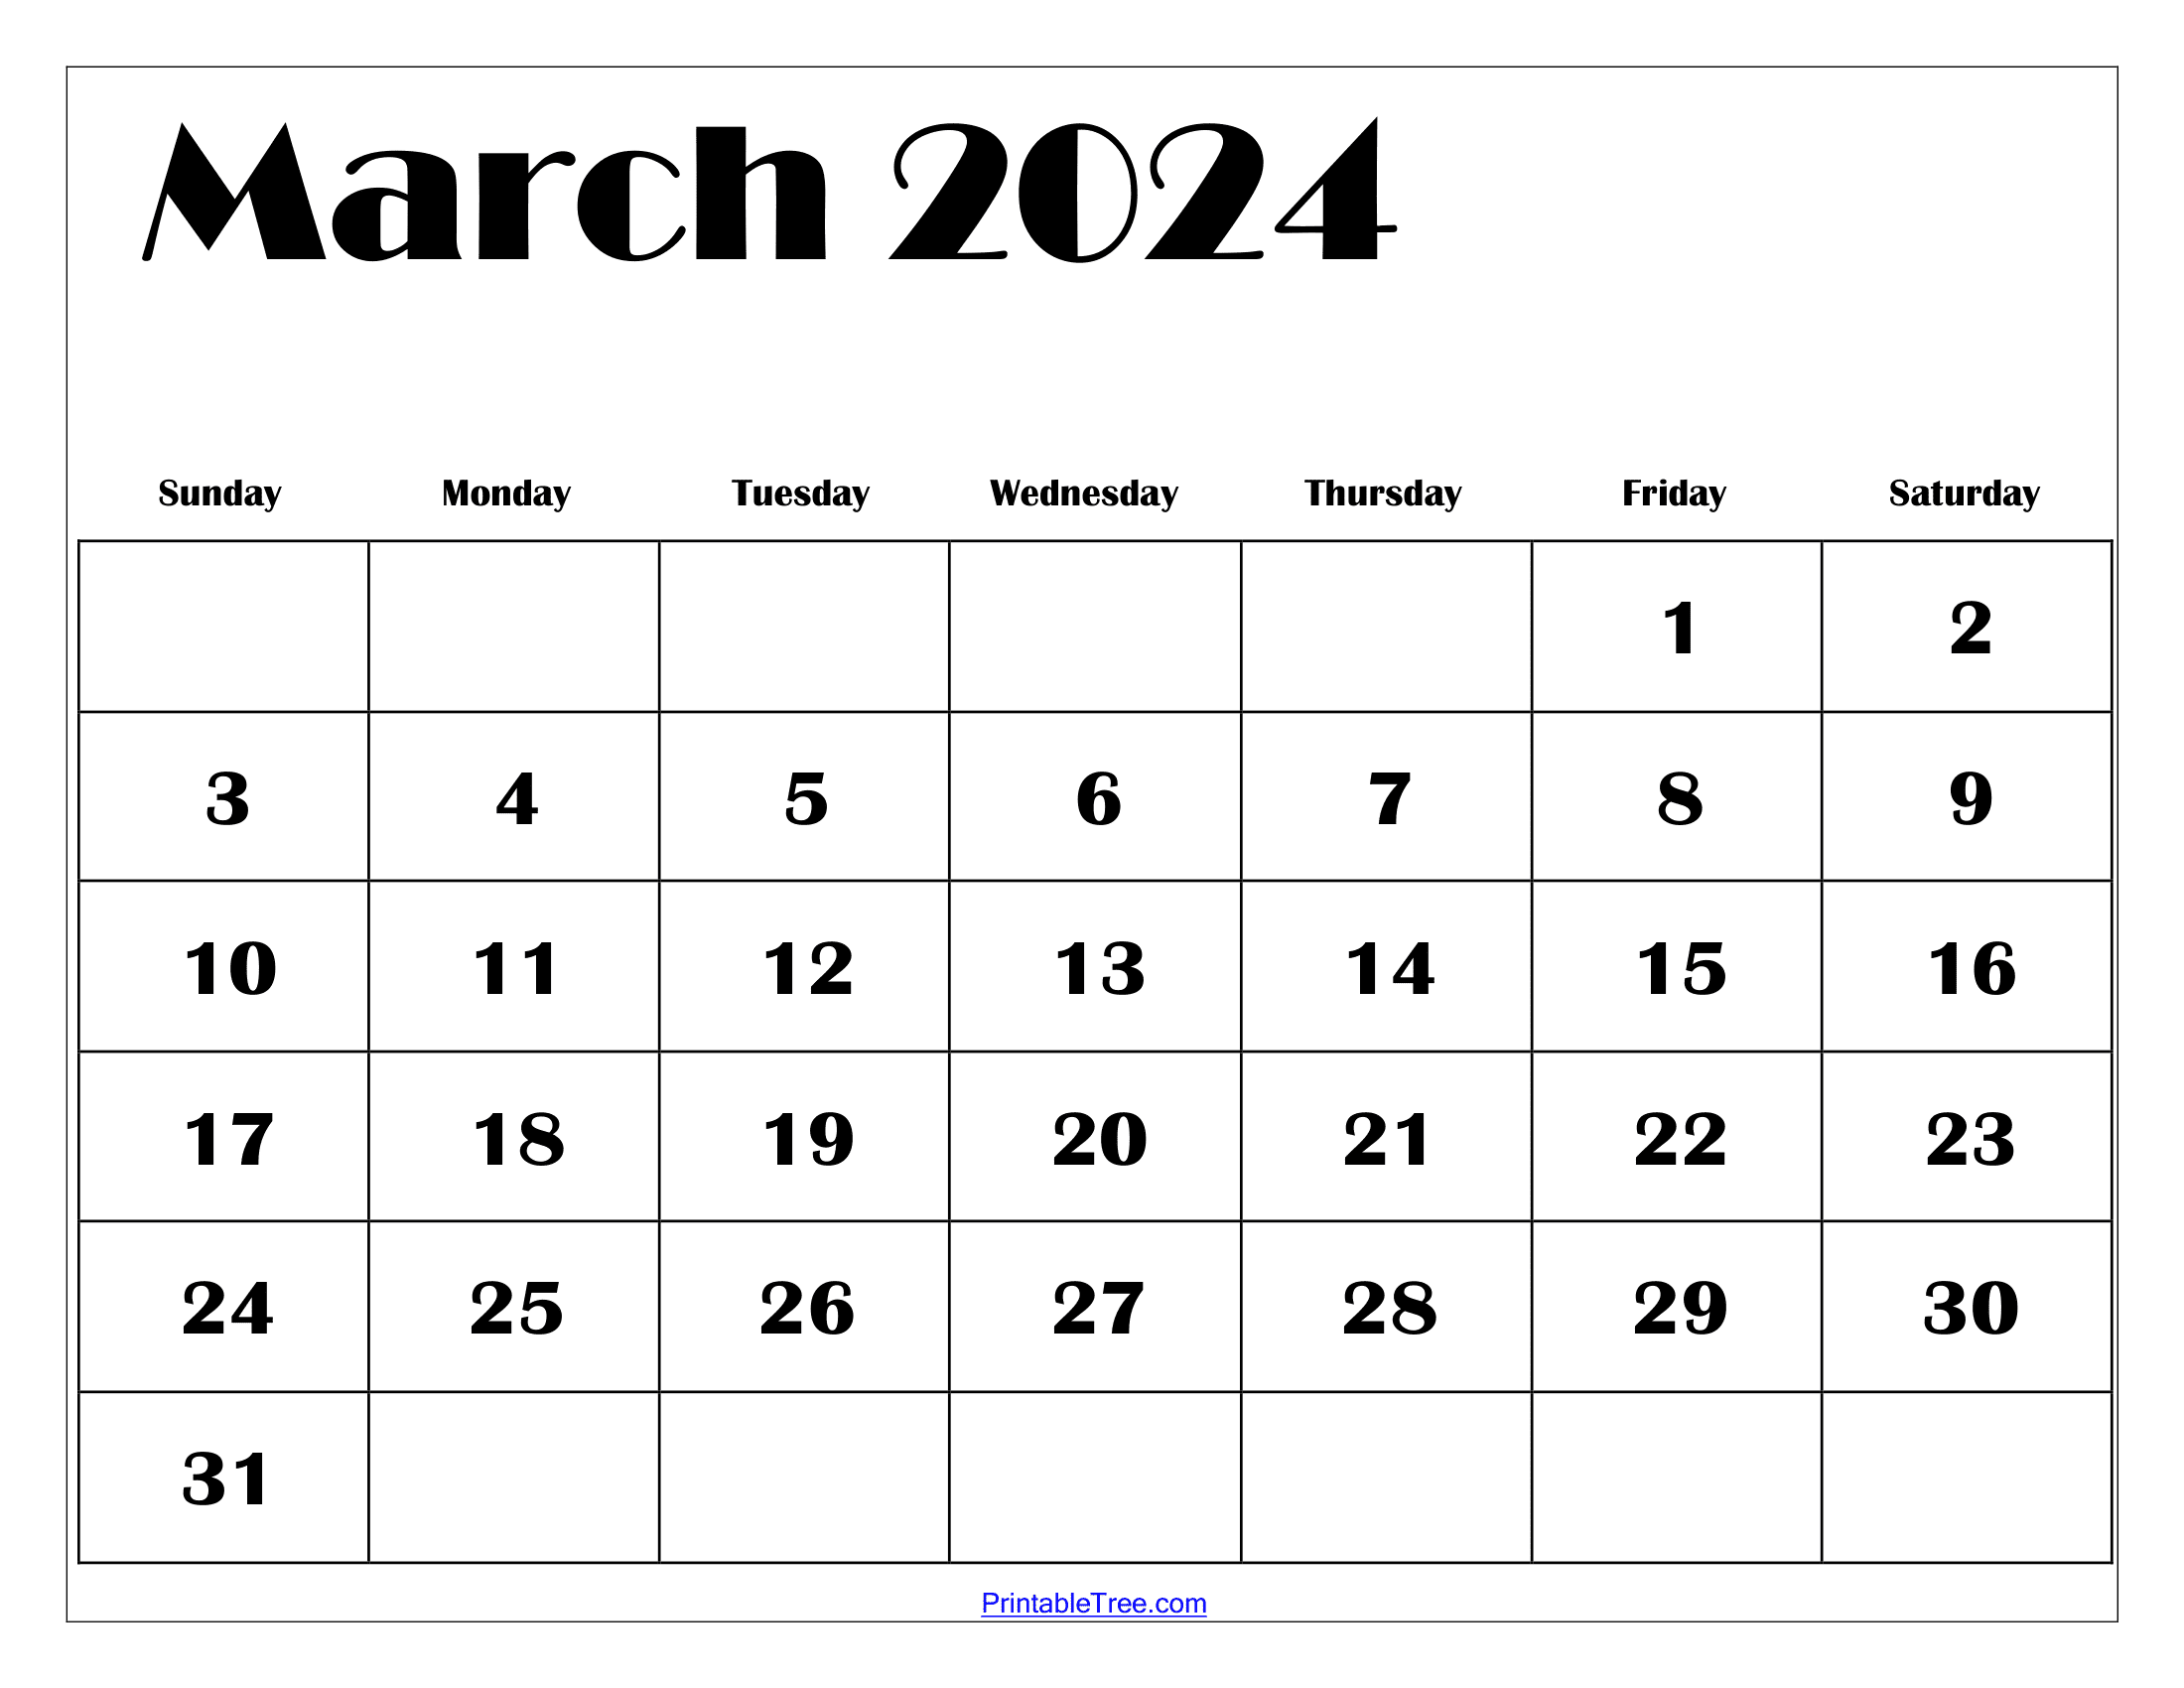 March 2024 Calendar Printable Pdf With Holidays Template Free for Printable March 2024 Calendar Free